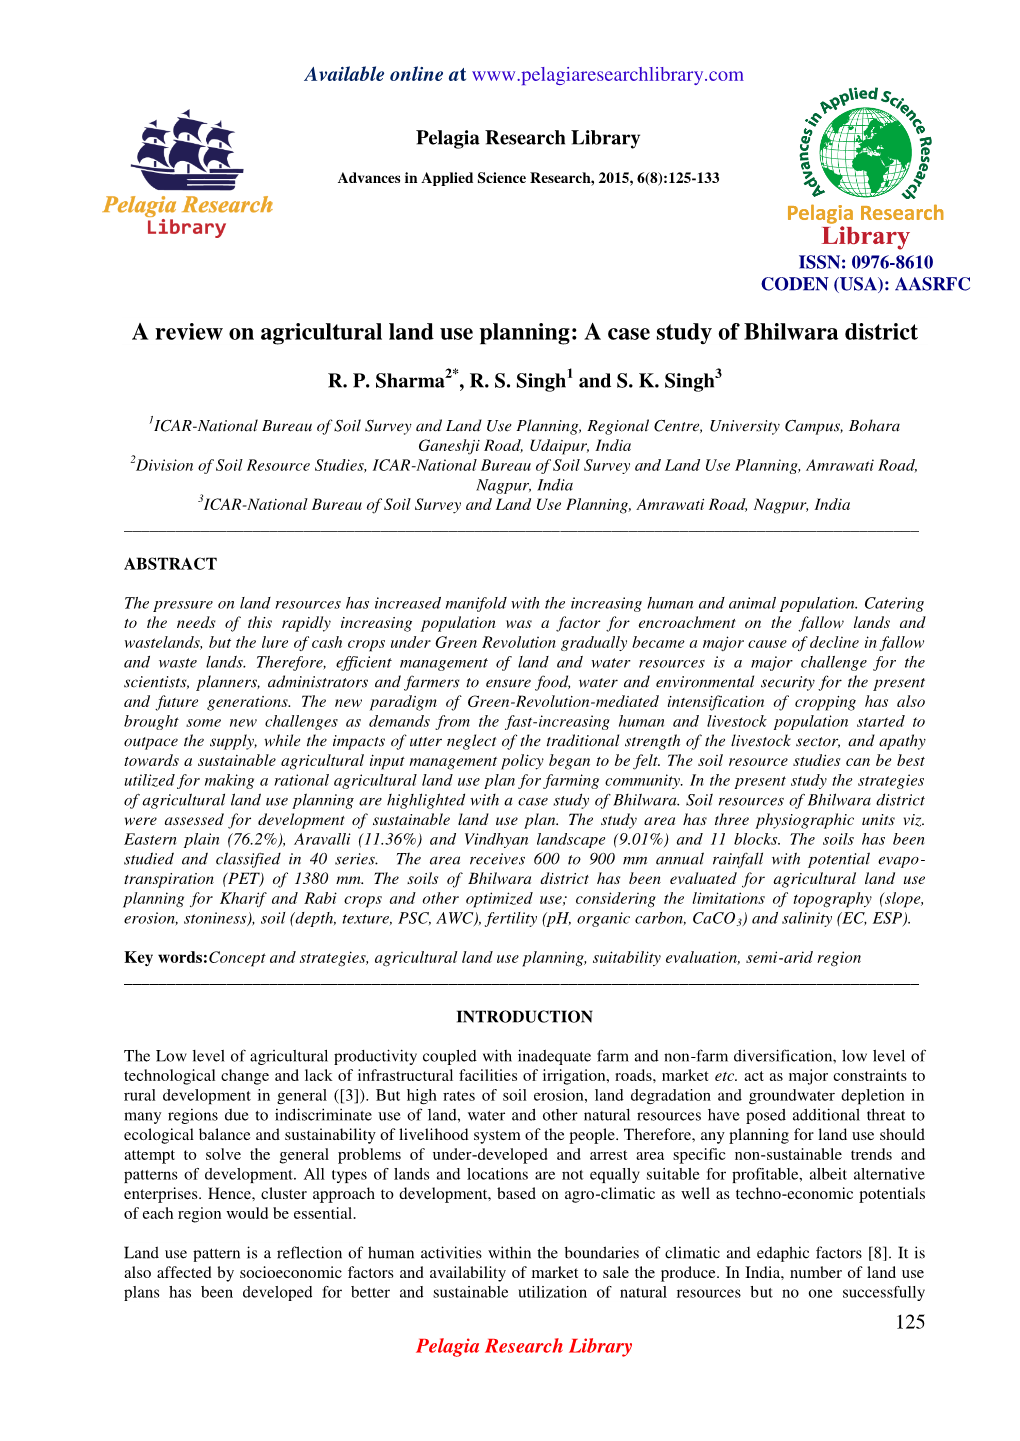 A Review on Agricultural Land Use Planning: a Case Study of Bhilwara District